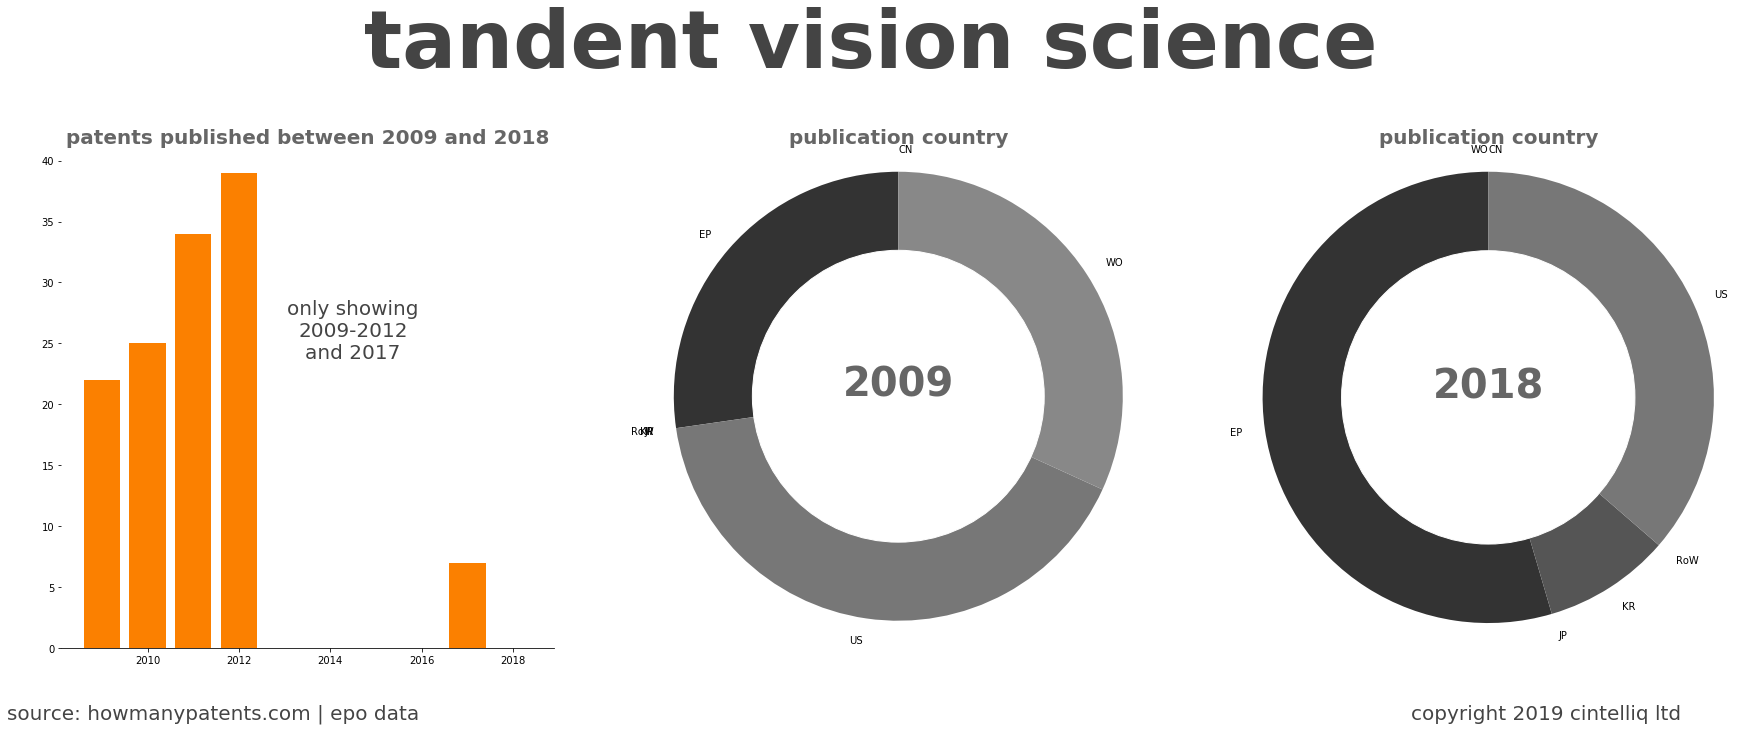 summary of patents for Tandent Vision Science